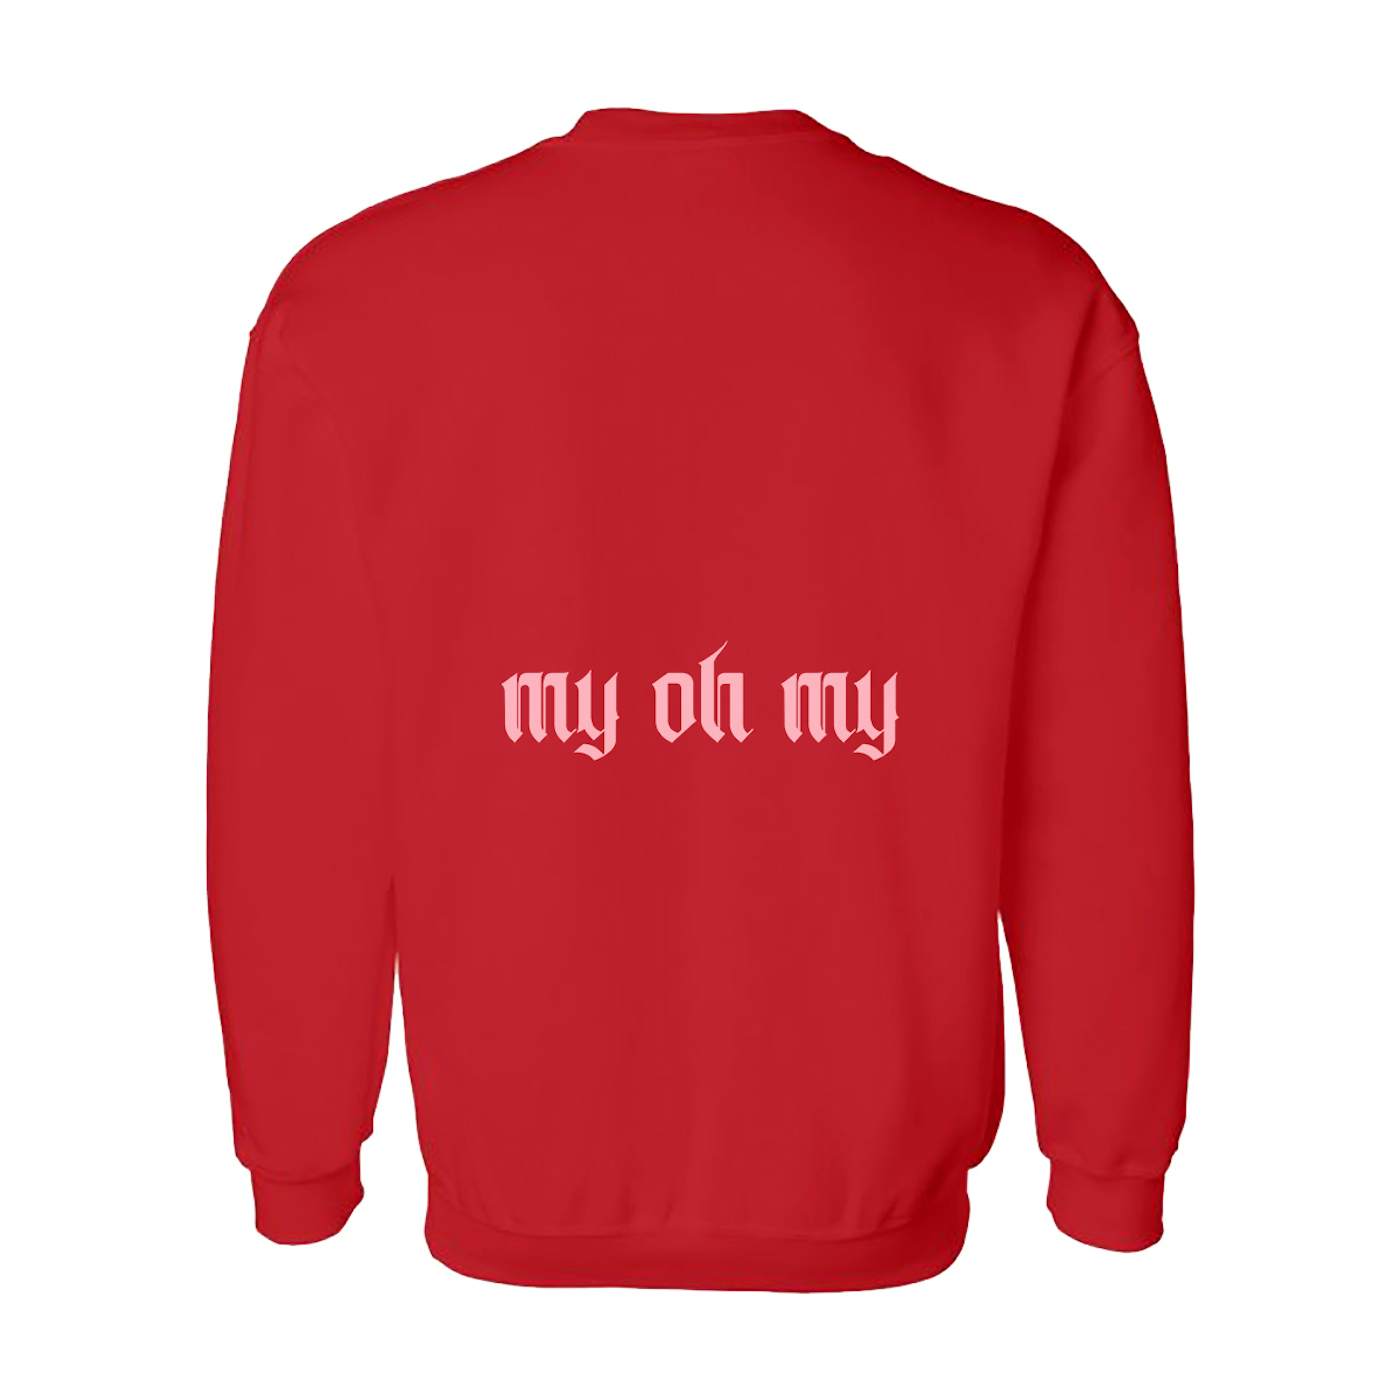 Camila Cabello My Oh My! Red Long-Sleeve Tee